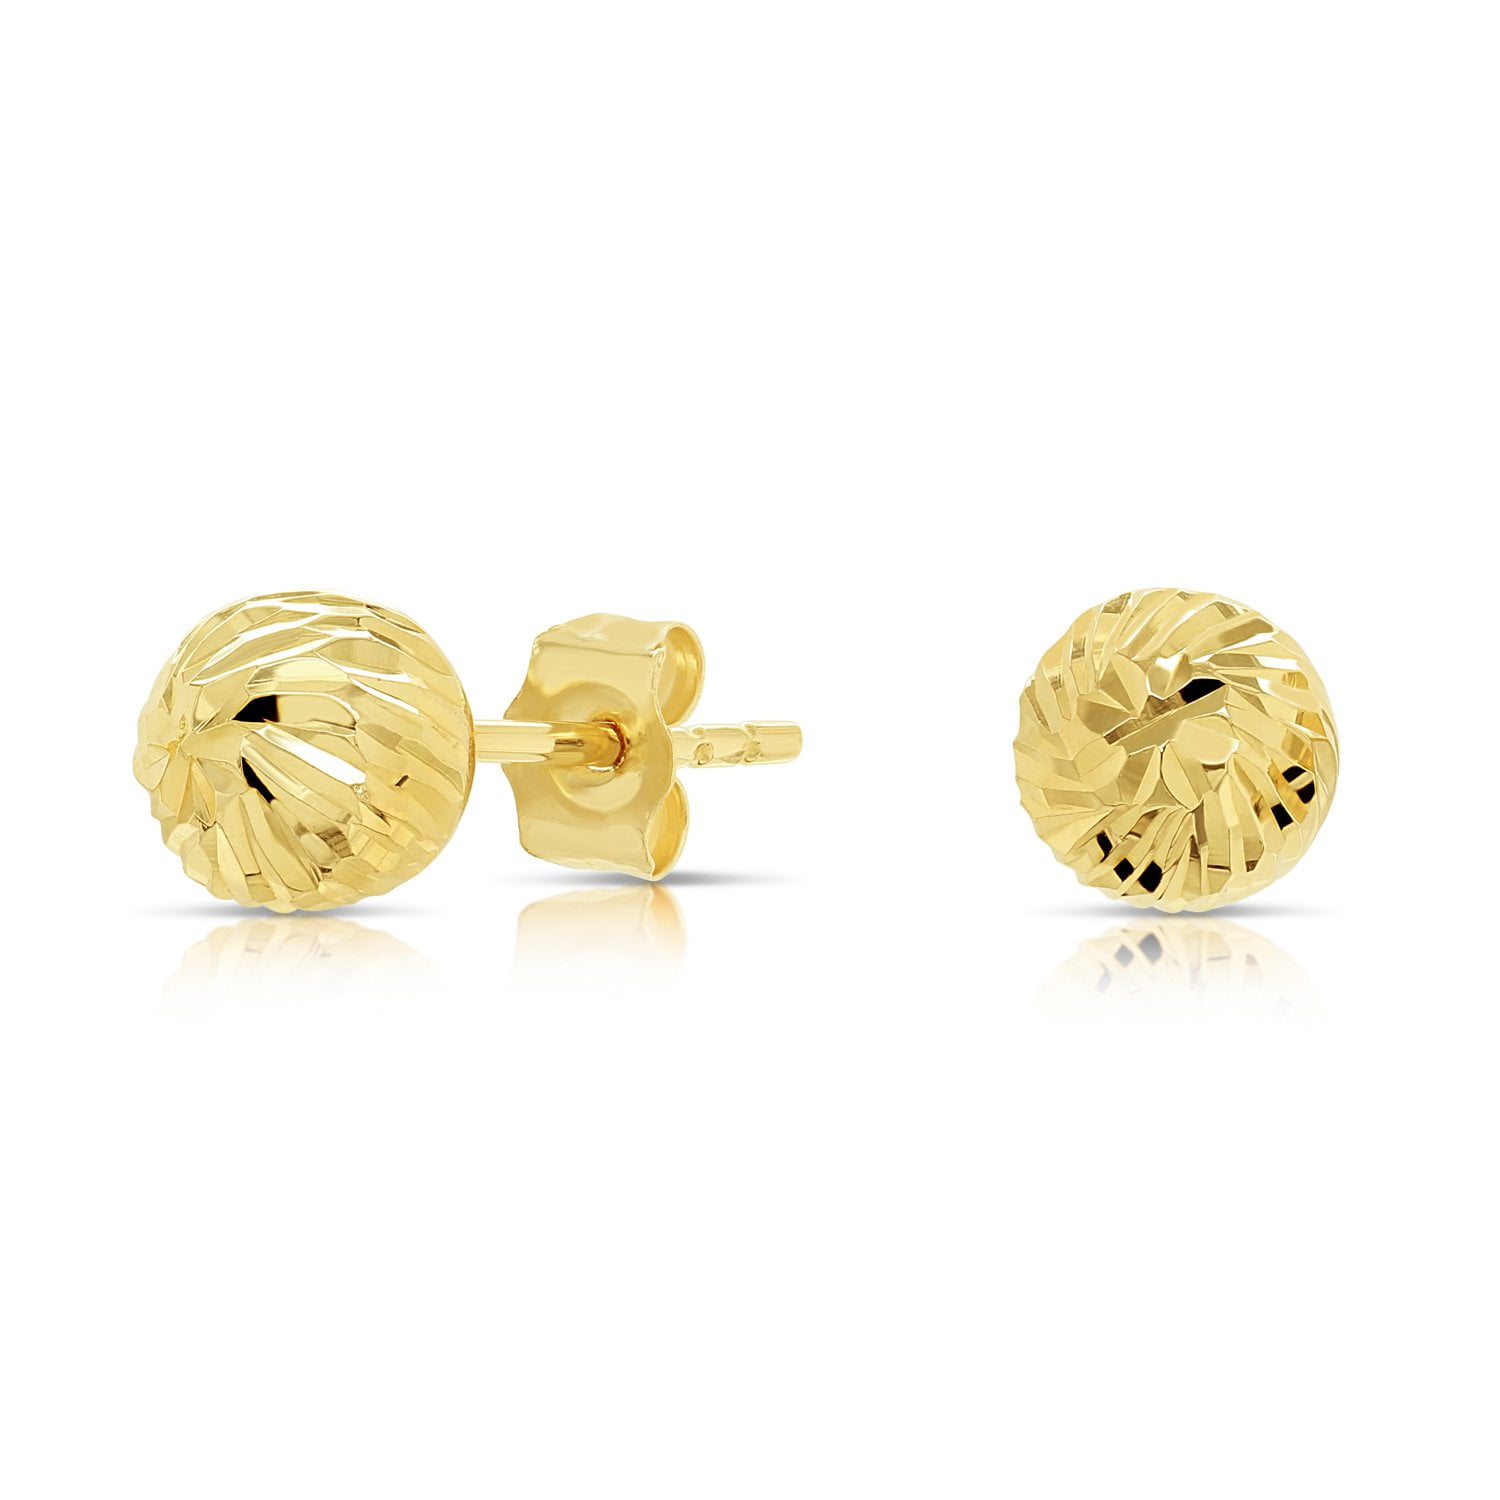 Luxury Adornments: Gold Earrings for Men – ORIONZ